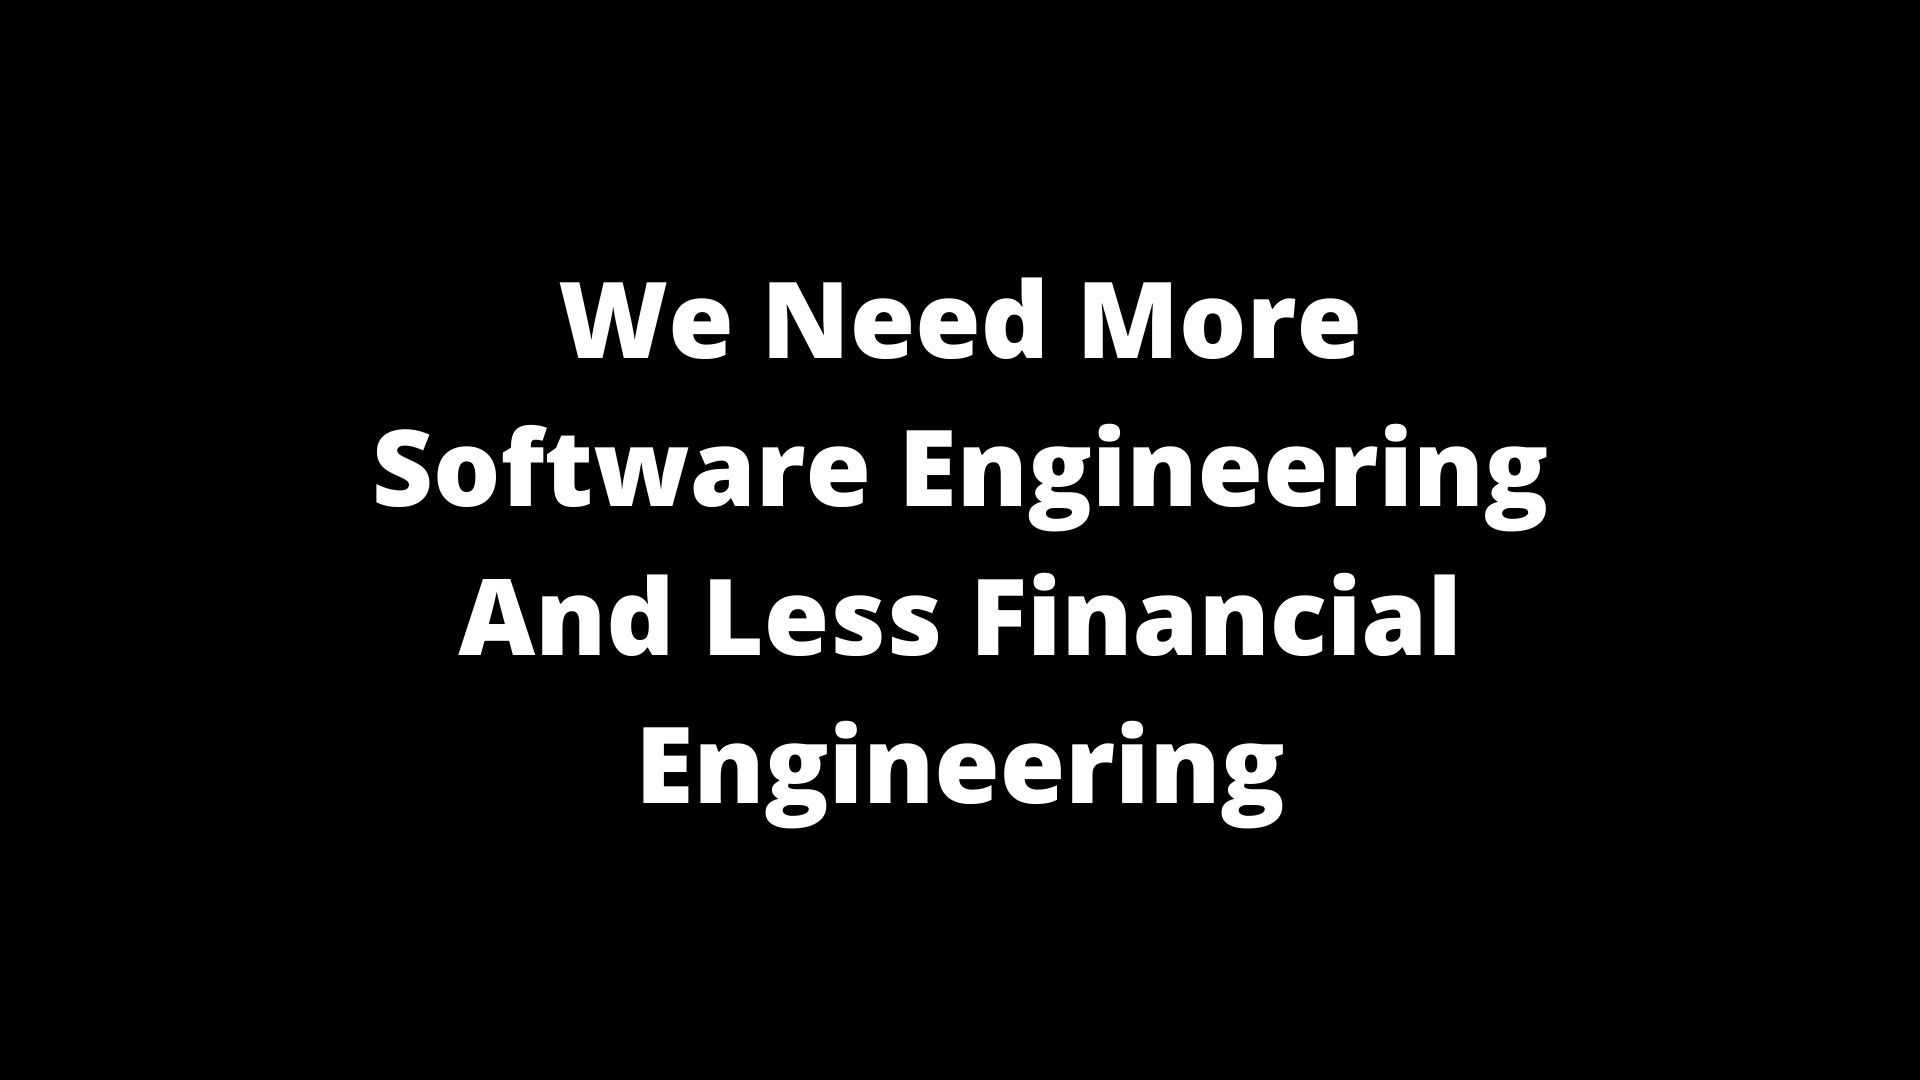 We Need More Software Engineering And Less Financial Engineering